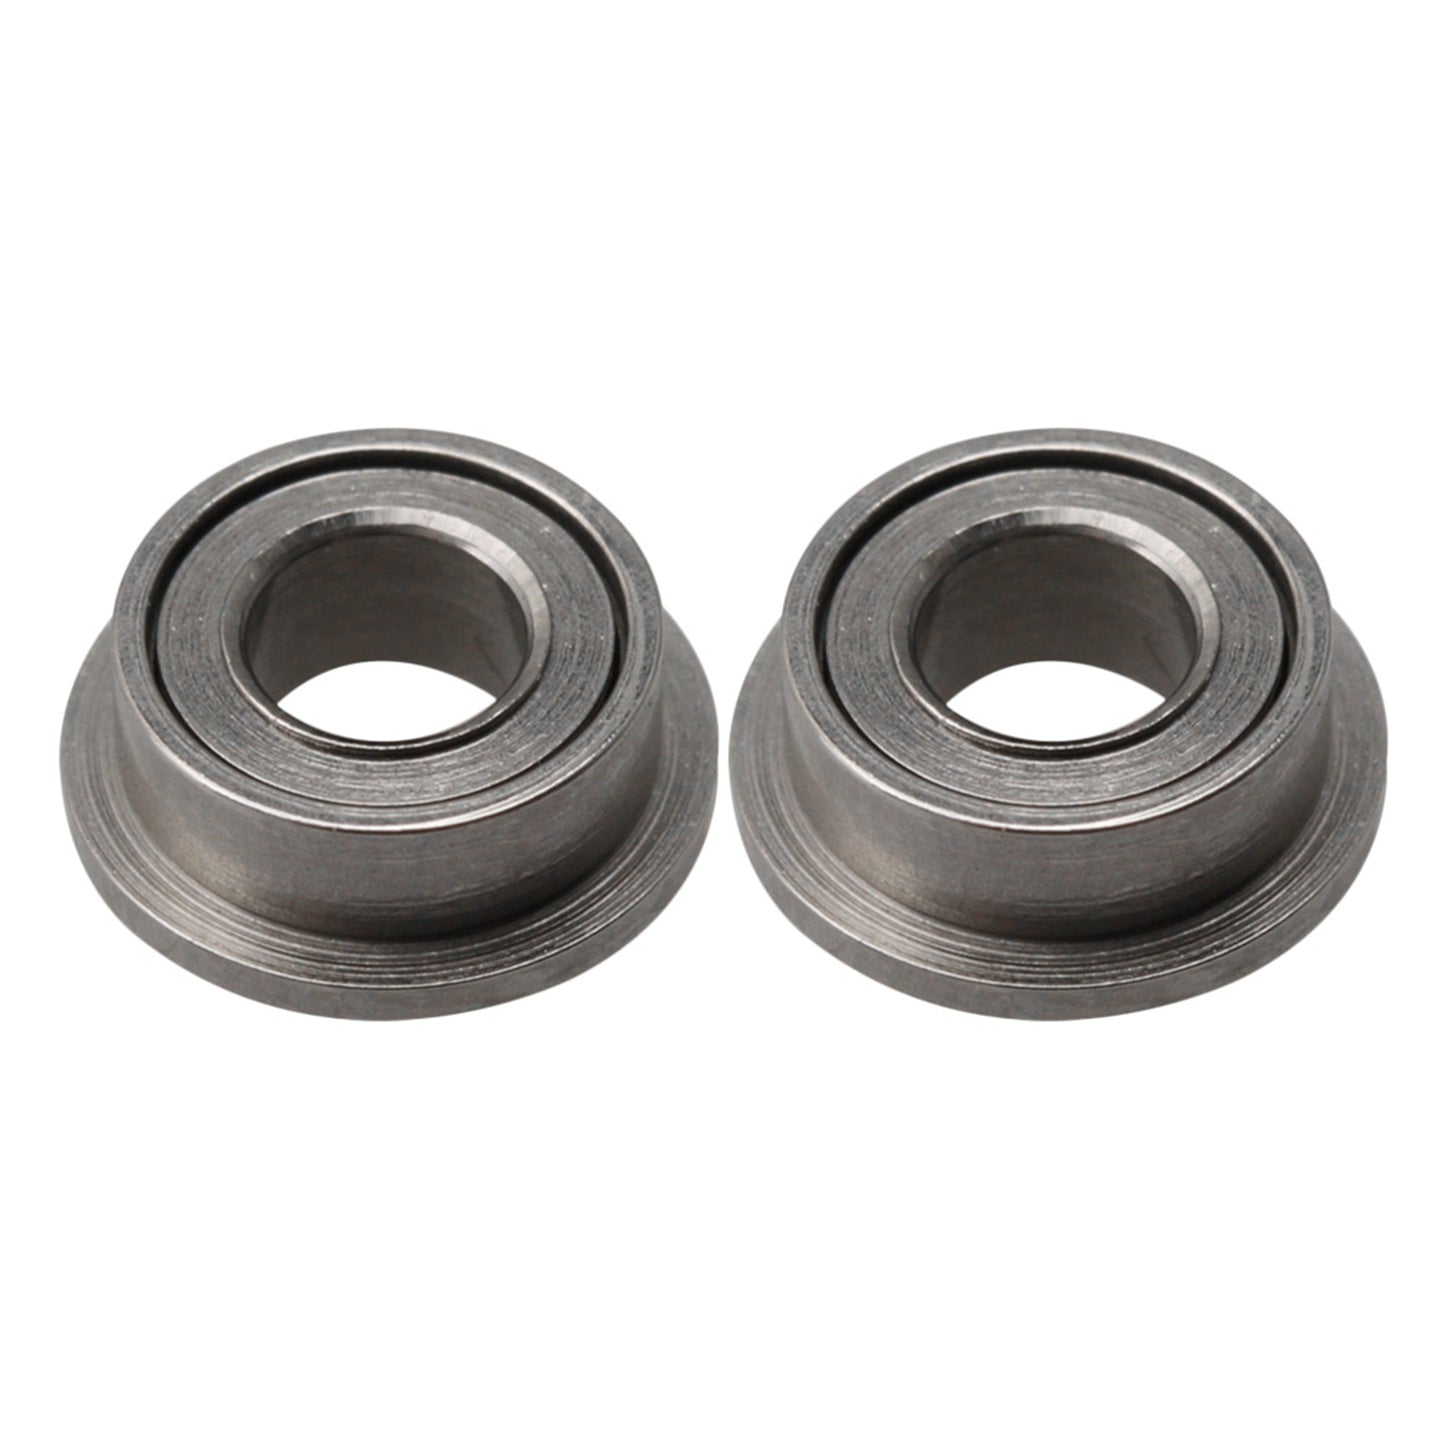 BQLZR Titanium Color 0.3x0.6x0.25CM MF63ZZ Bearing Steel Double Shielded Flanged Ball Bearing for Equipments Machines Pack of 10